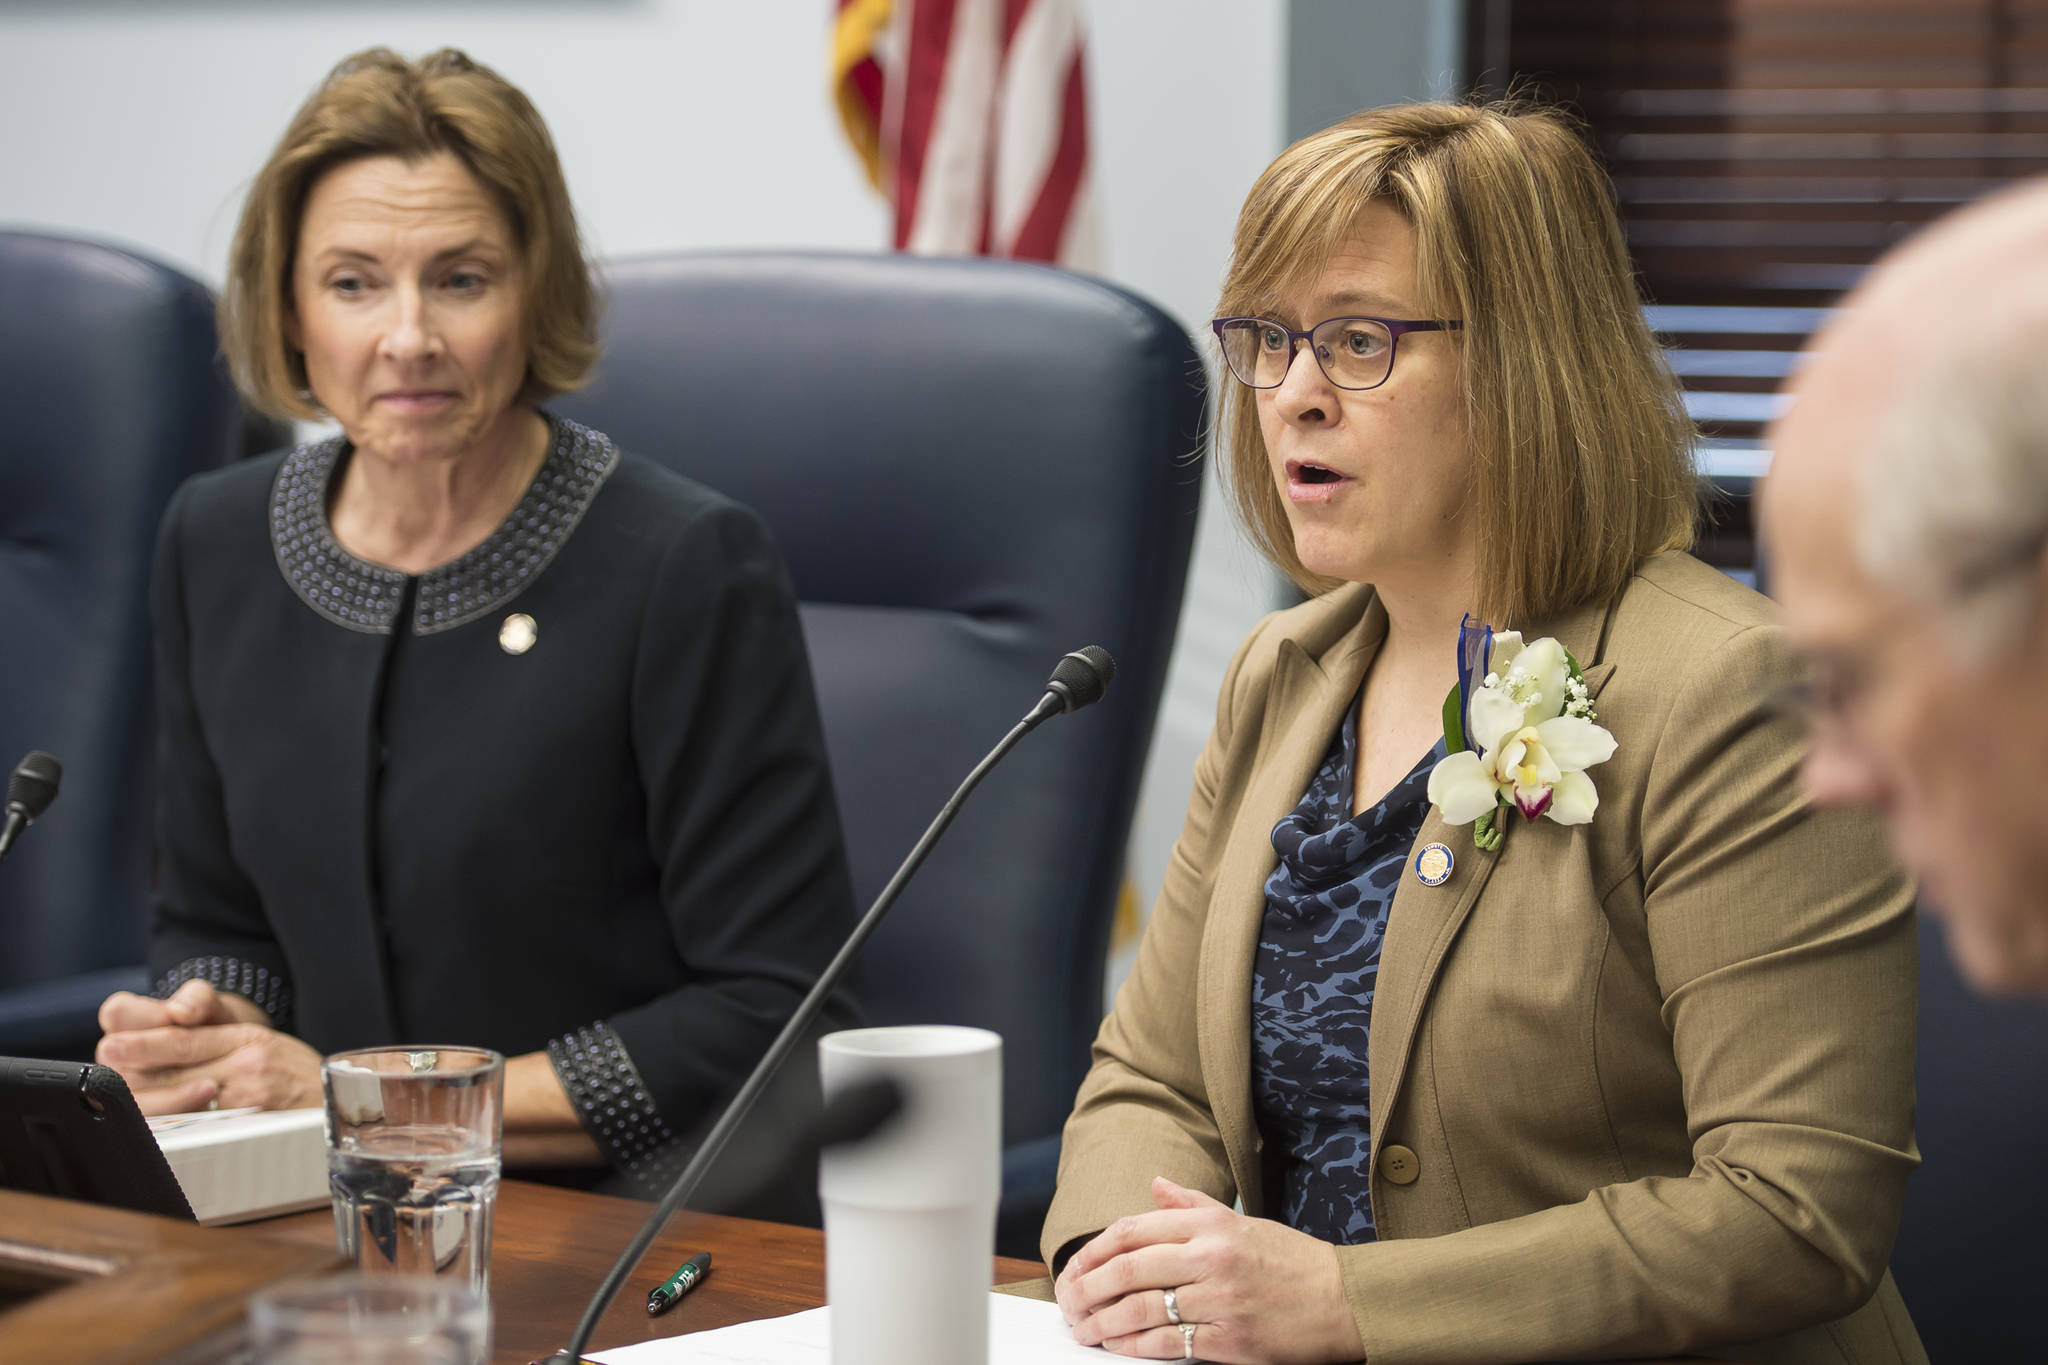 Sen. Mia Costello, R-Anchorage, right, and Senate President Cathy Giessel, R-Anchorage, speak during a Senate Majority press conference on the opening day of the 31st Session of the Alaska Legislature on Tuesday, Jan. 15, 2019. (Michael Penn | Juneau Empire)